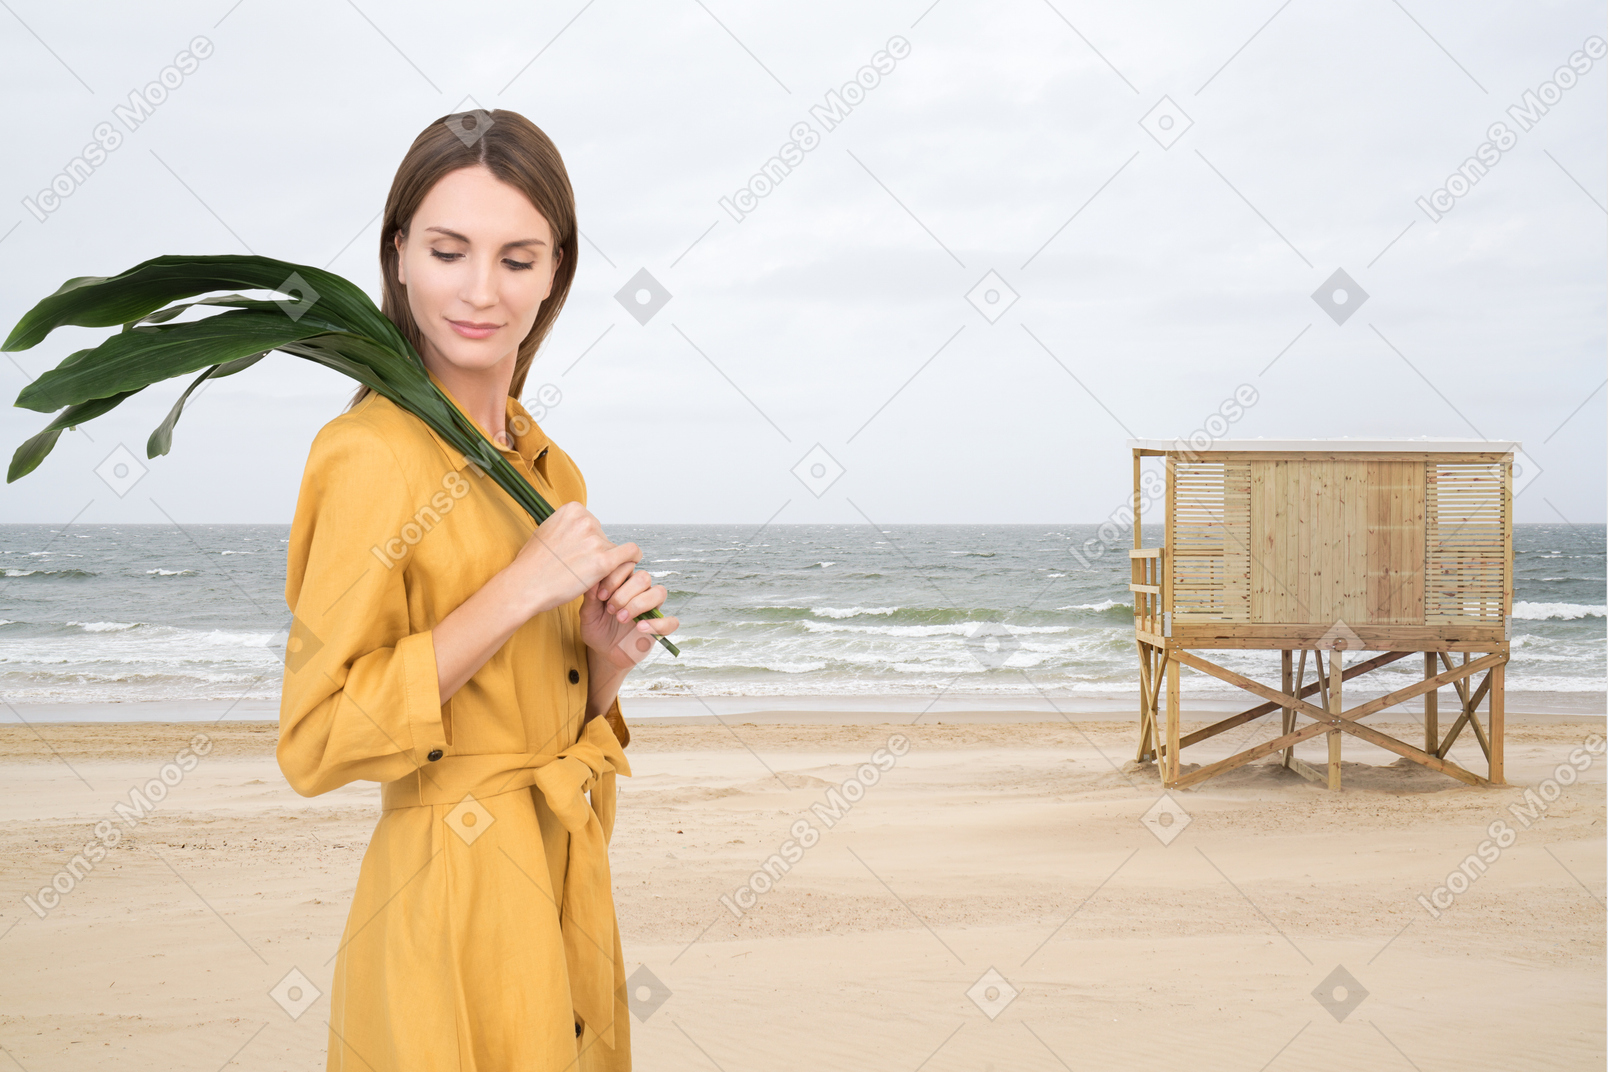 Woman with green leaves walking on the beach